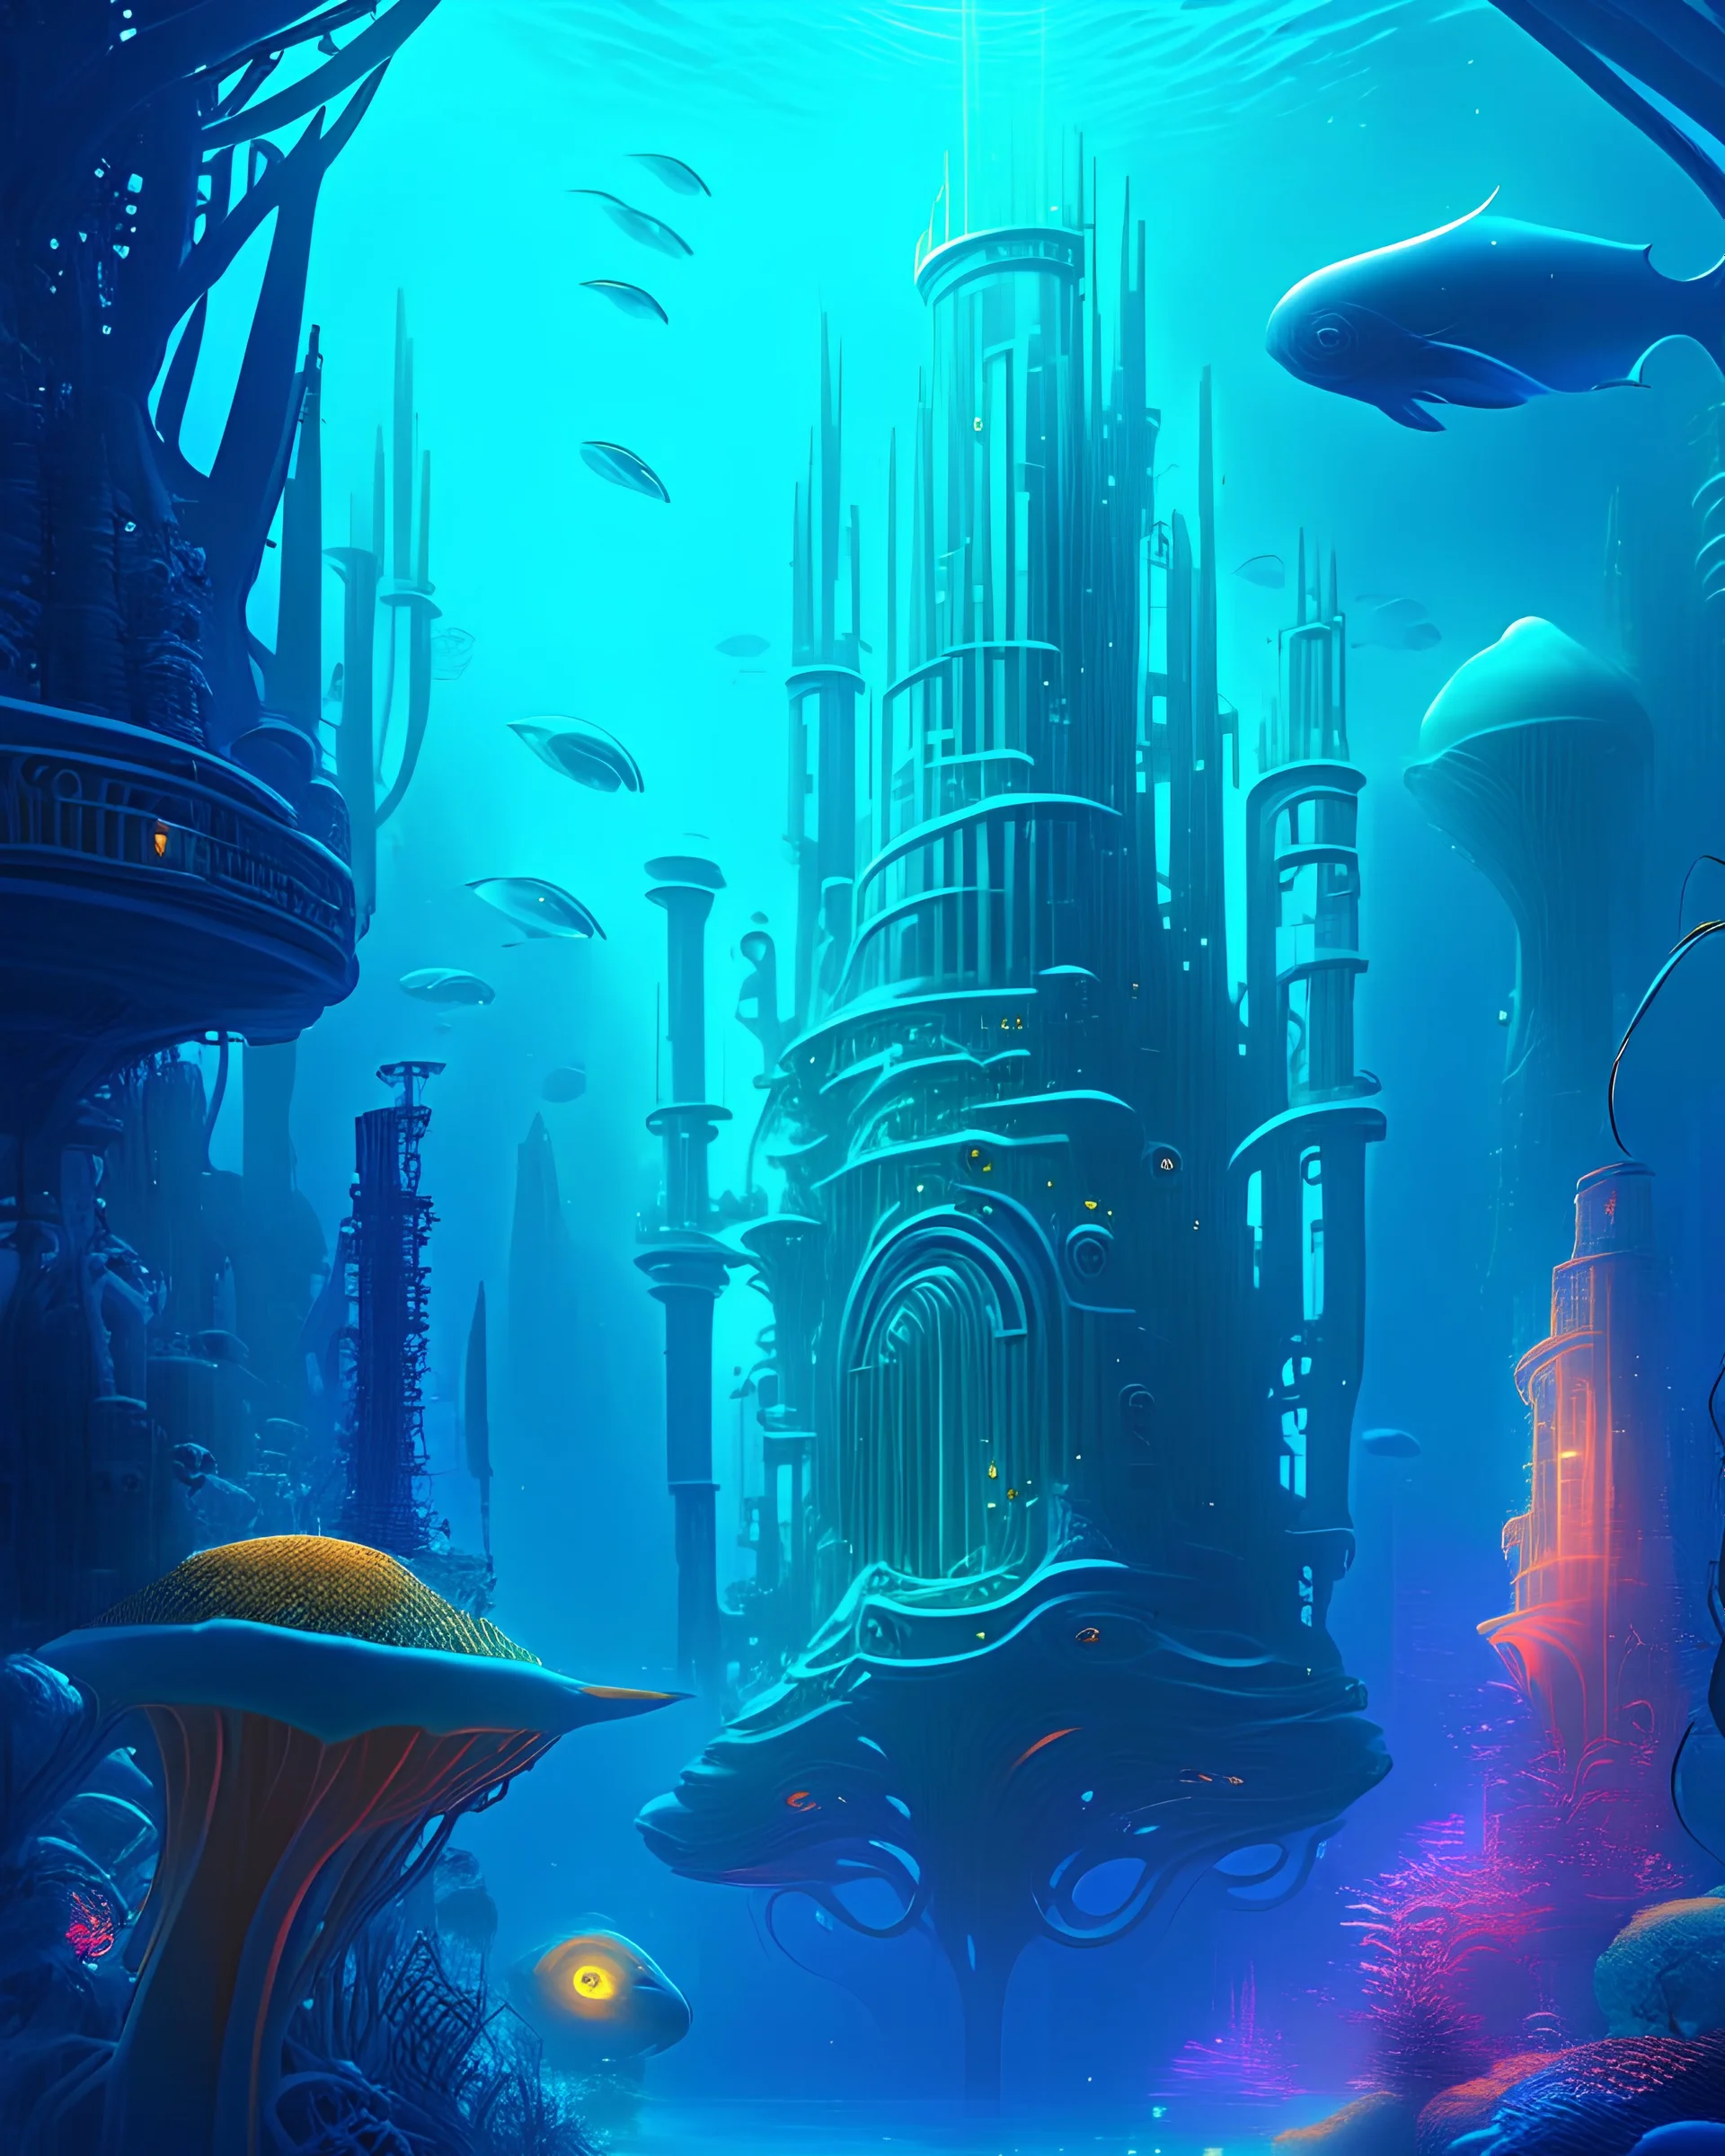 An underwater city with futuristic architecture, bioluminescent sea creatures, and advanced technology, in the style of science fiction, vibrant colors, detailed environments, mysterious ambiance, 8K resolution